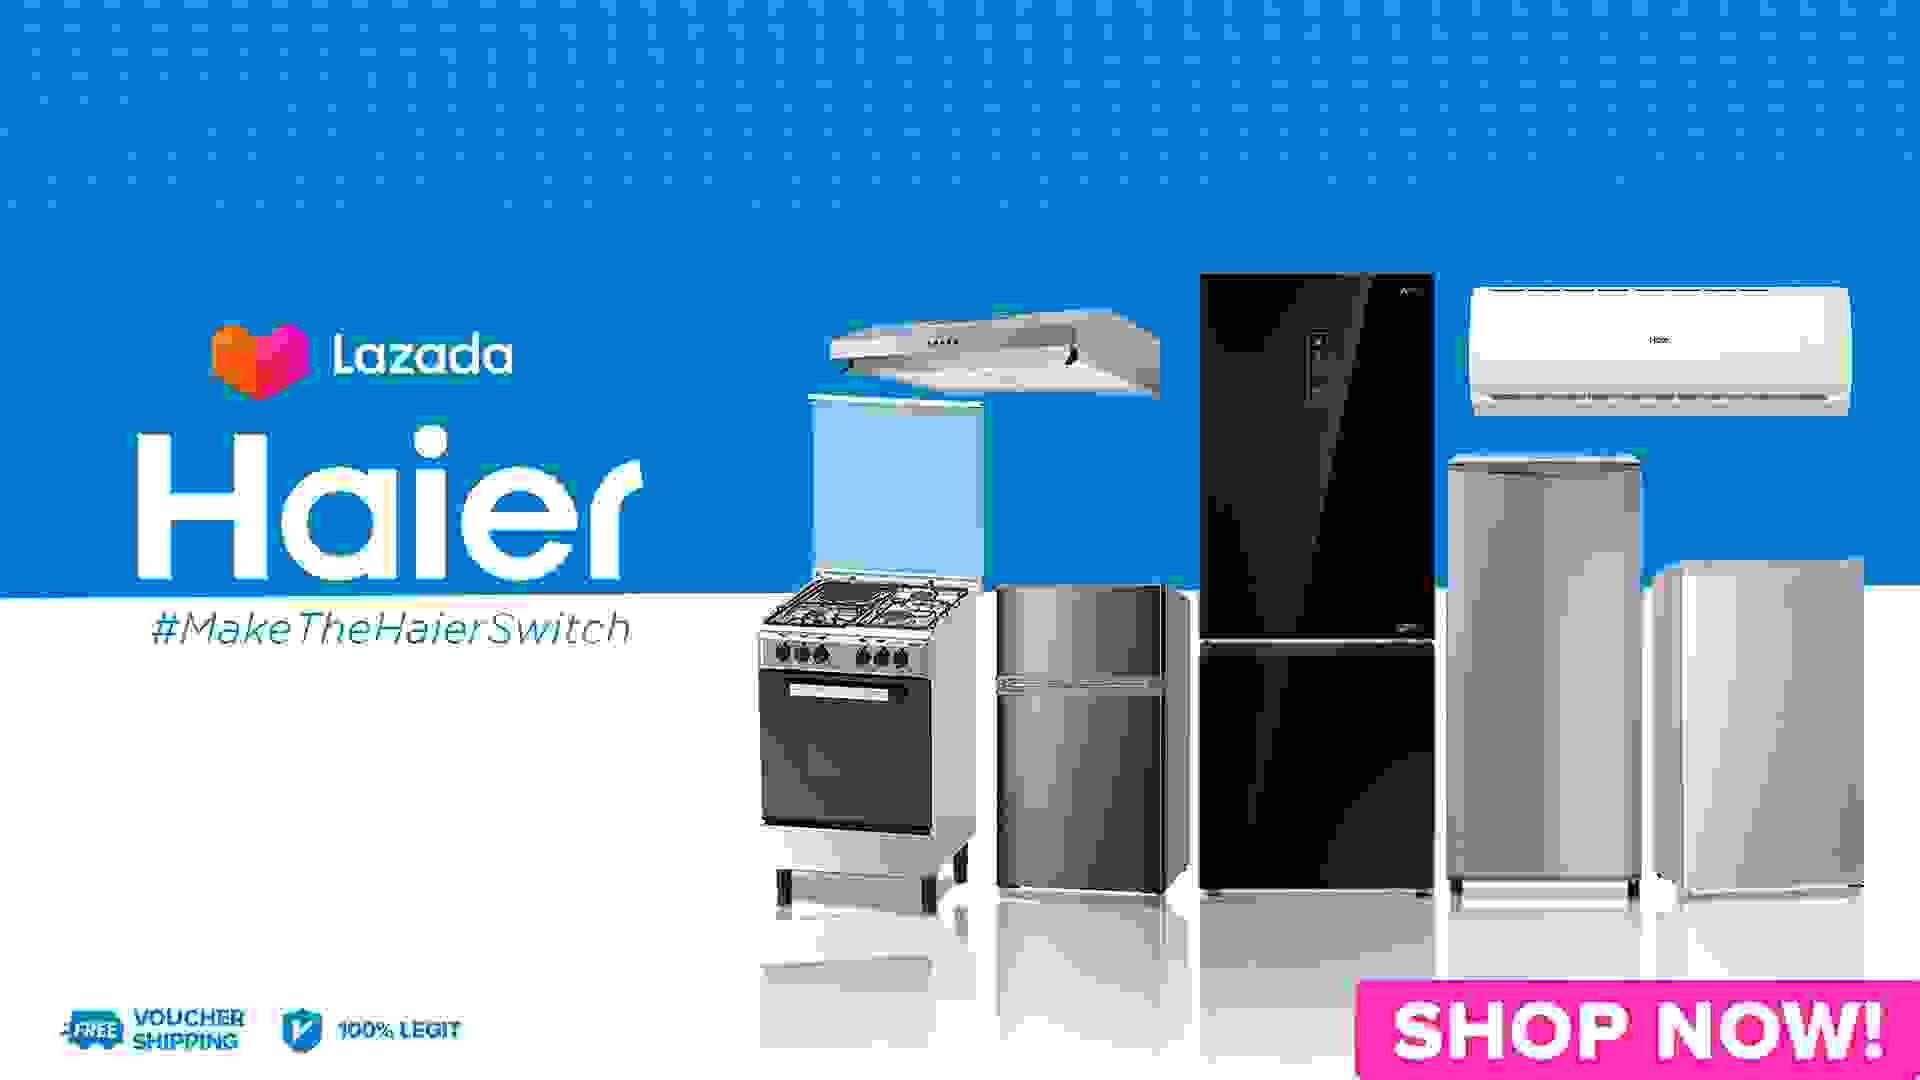 Homie Appliances from Haier making our lives even better!